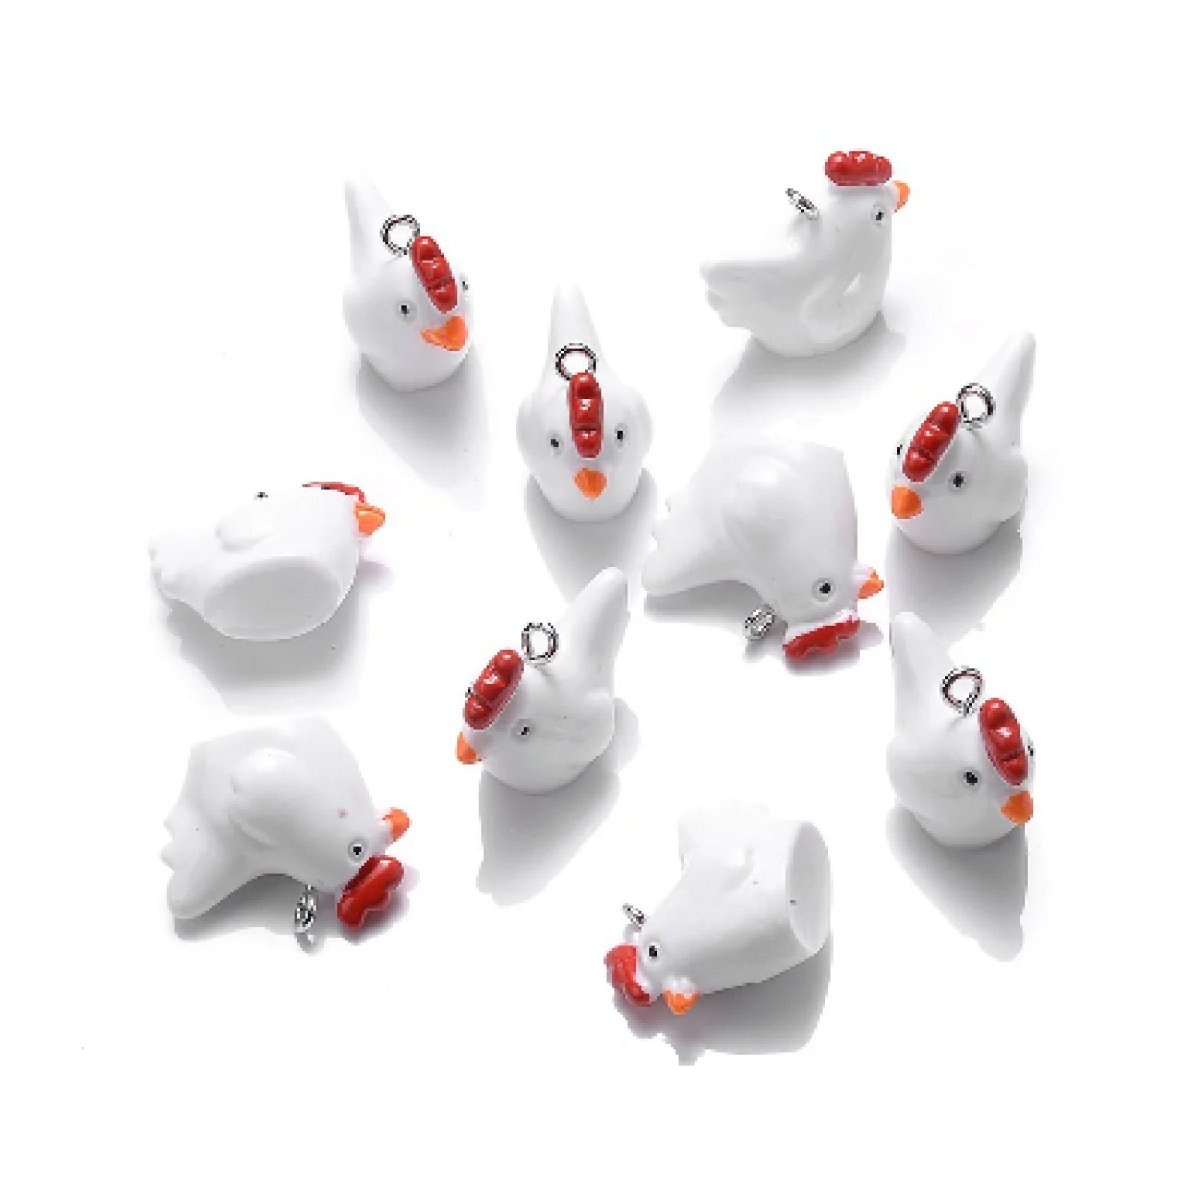 10pcs Miniature Mini Garden Animal Figurines Charms with Loop Pendant Craft - Chickens - Asia Sell